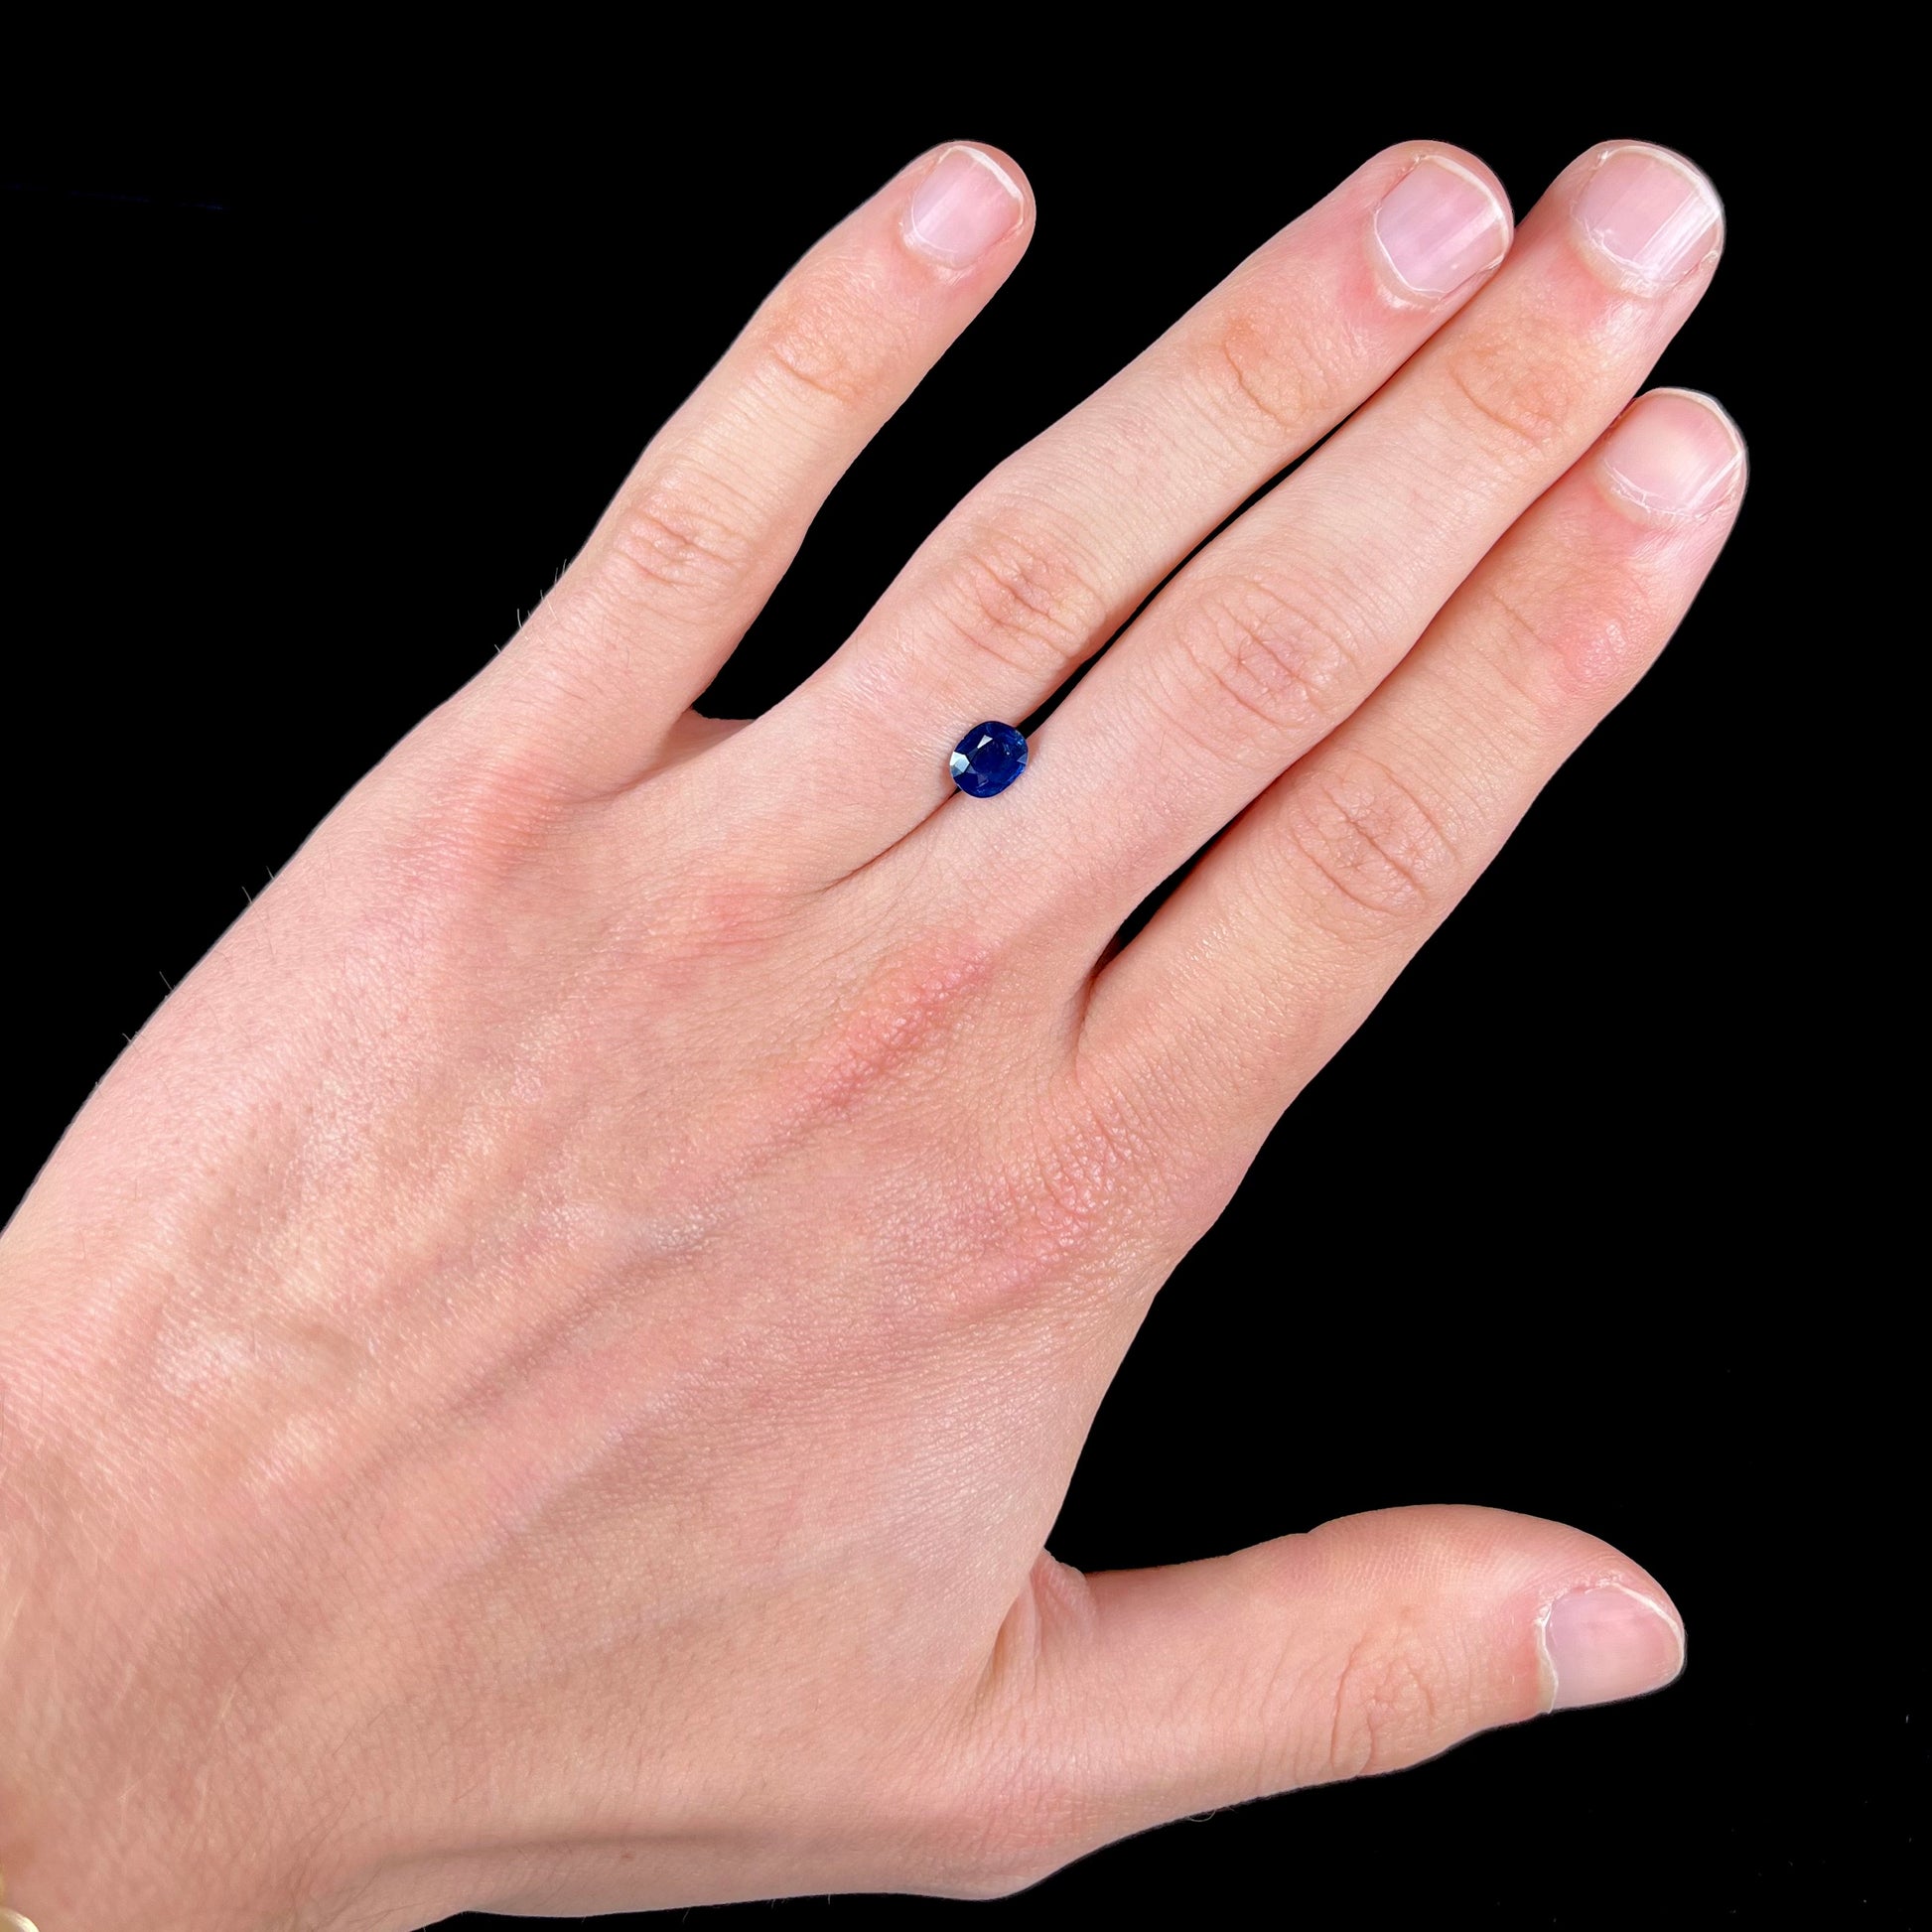 A loose, faceted oval cut dark blue natural sapphire stone.